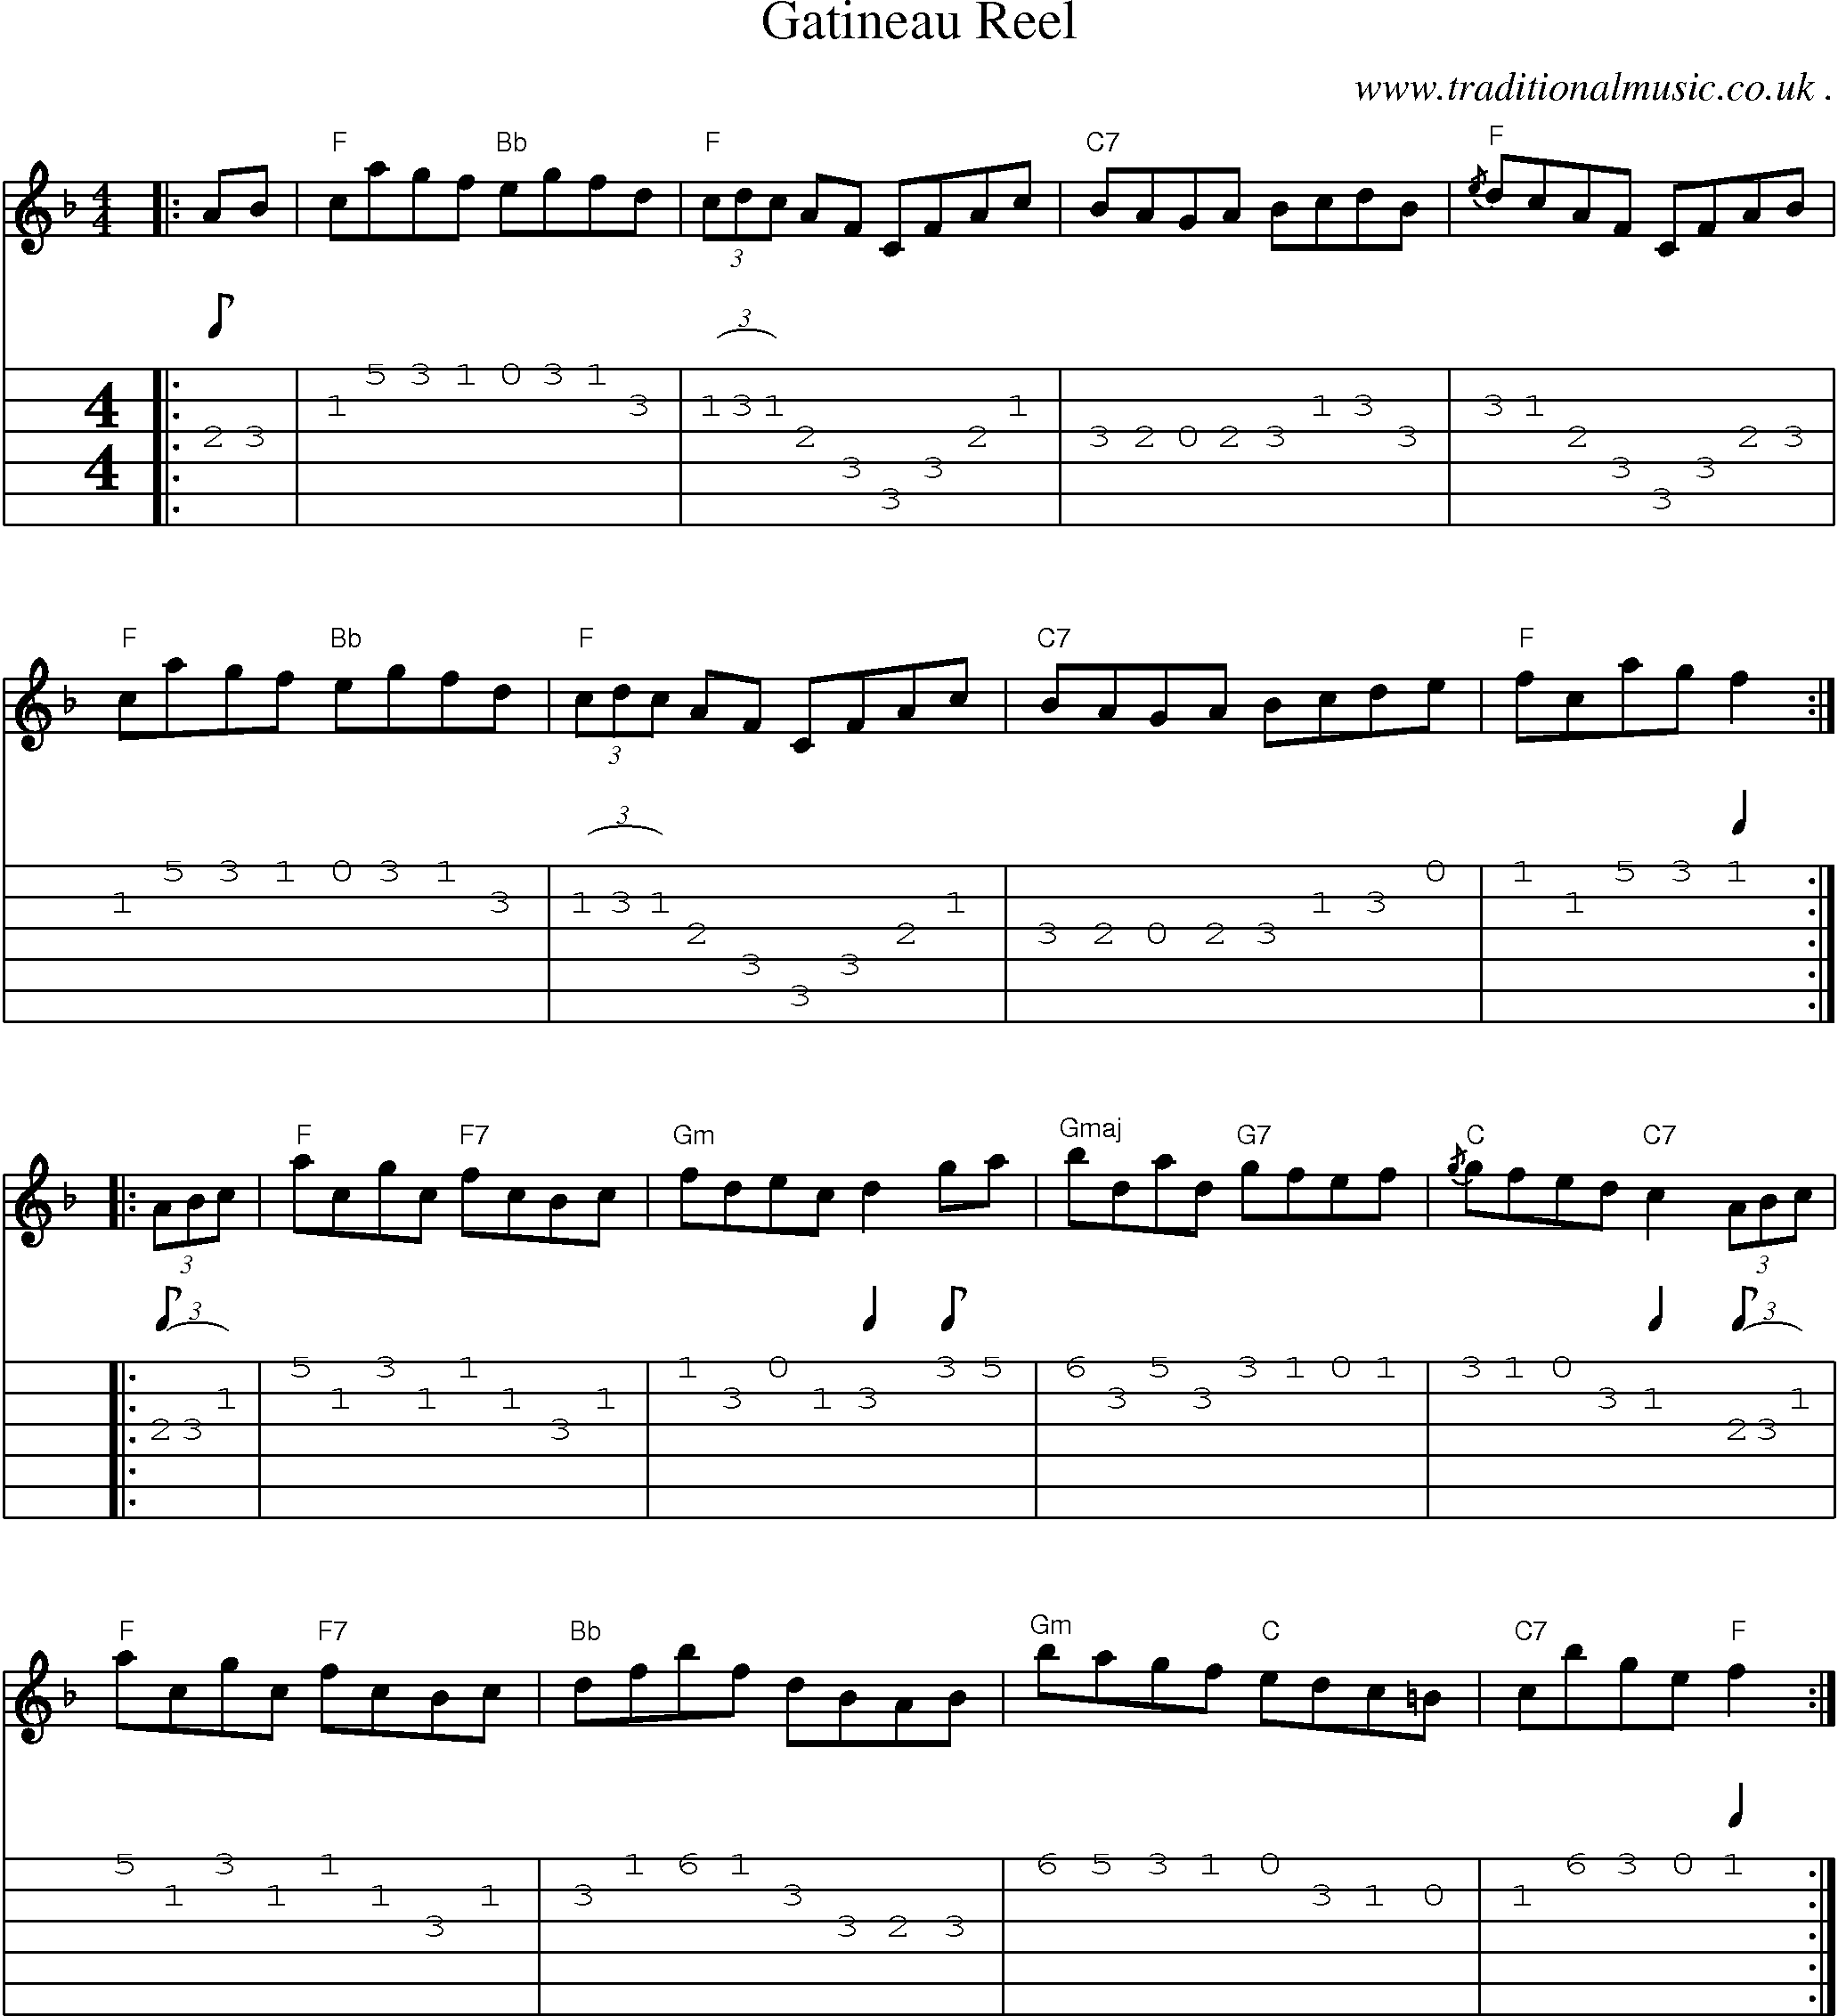 Music Score and Guitar Tabs for Gatineau Reel